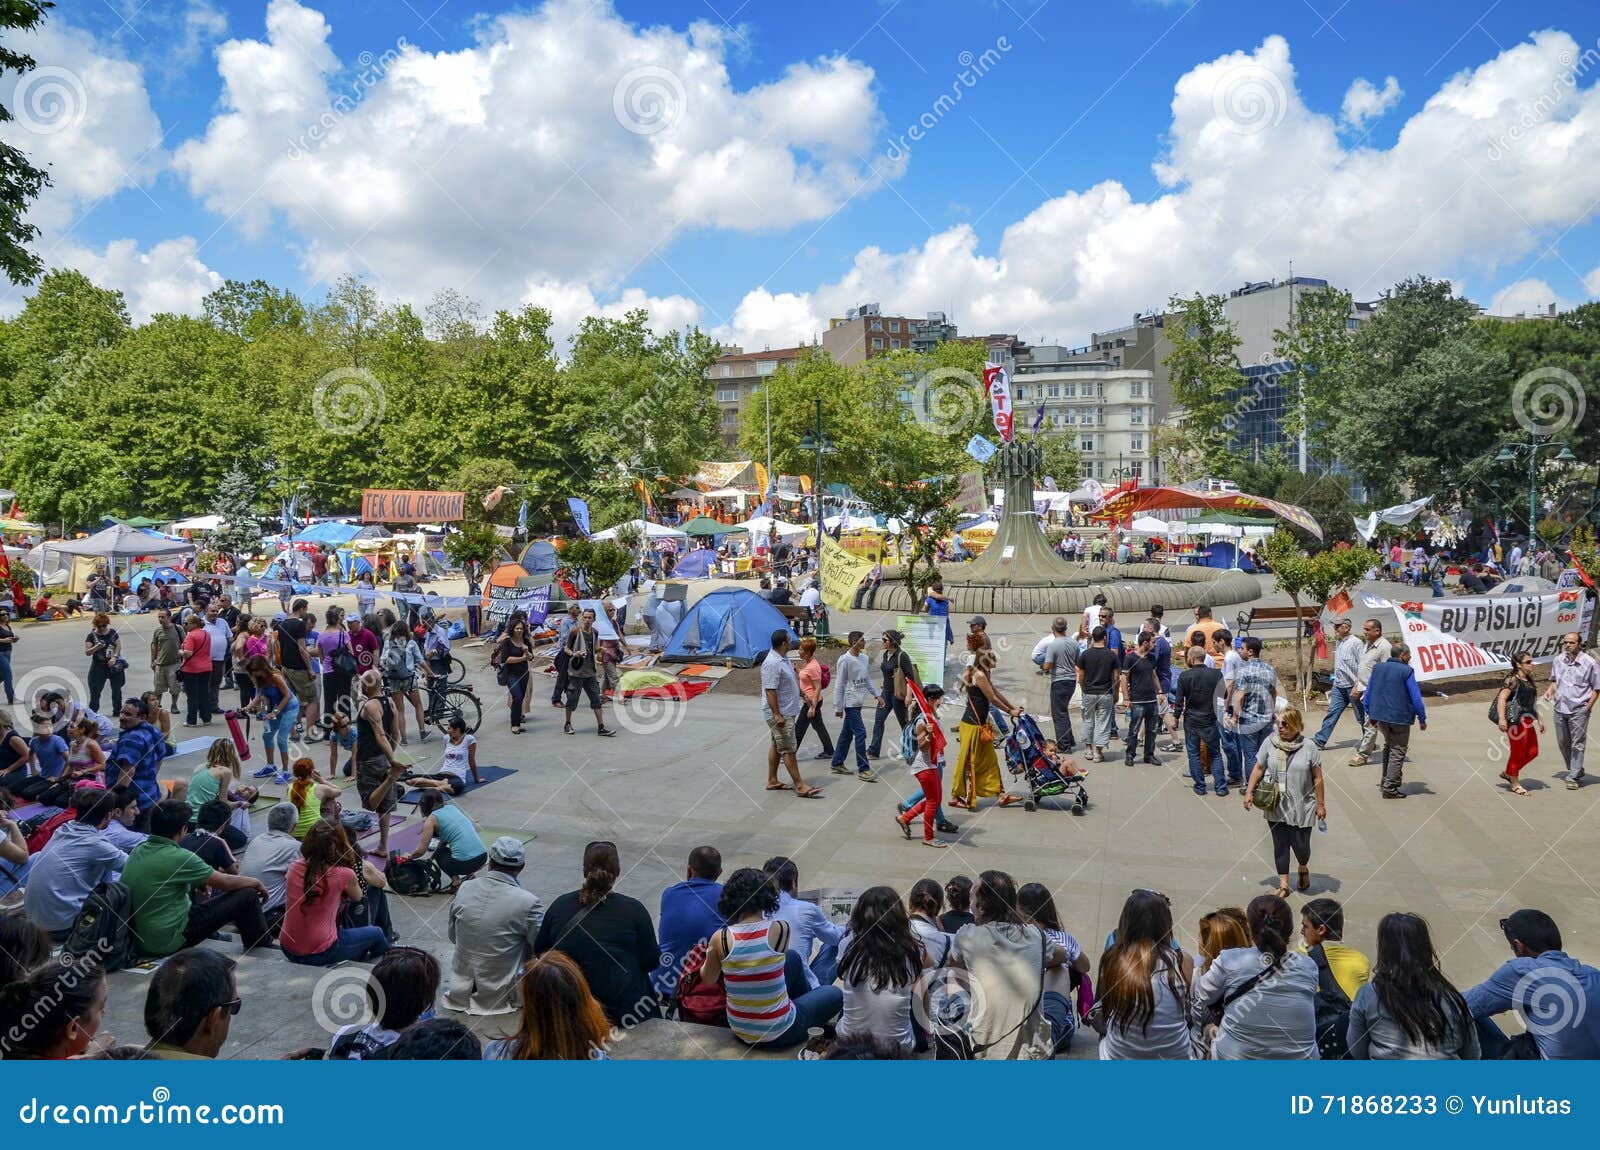 Taksim Gezi Park Protests And Events Editorial Stock Photo Image Of